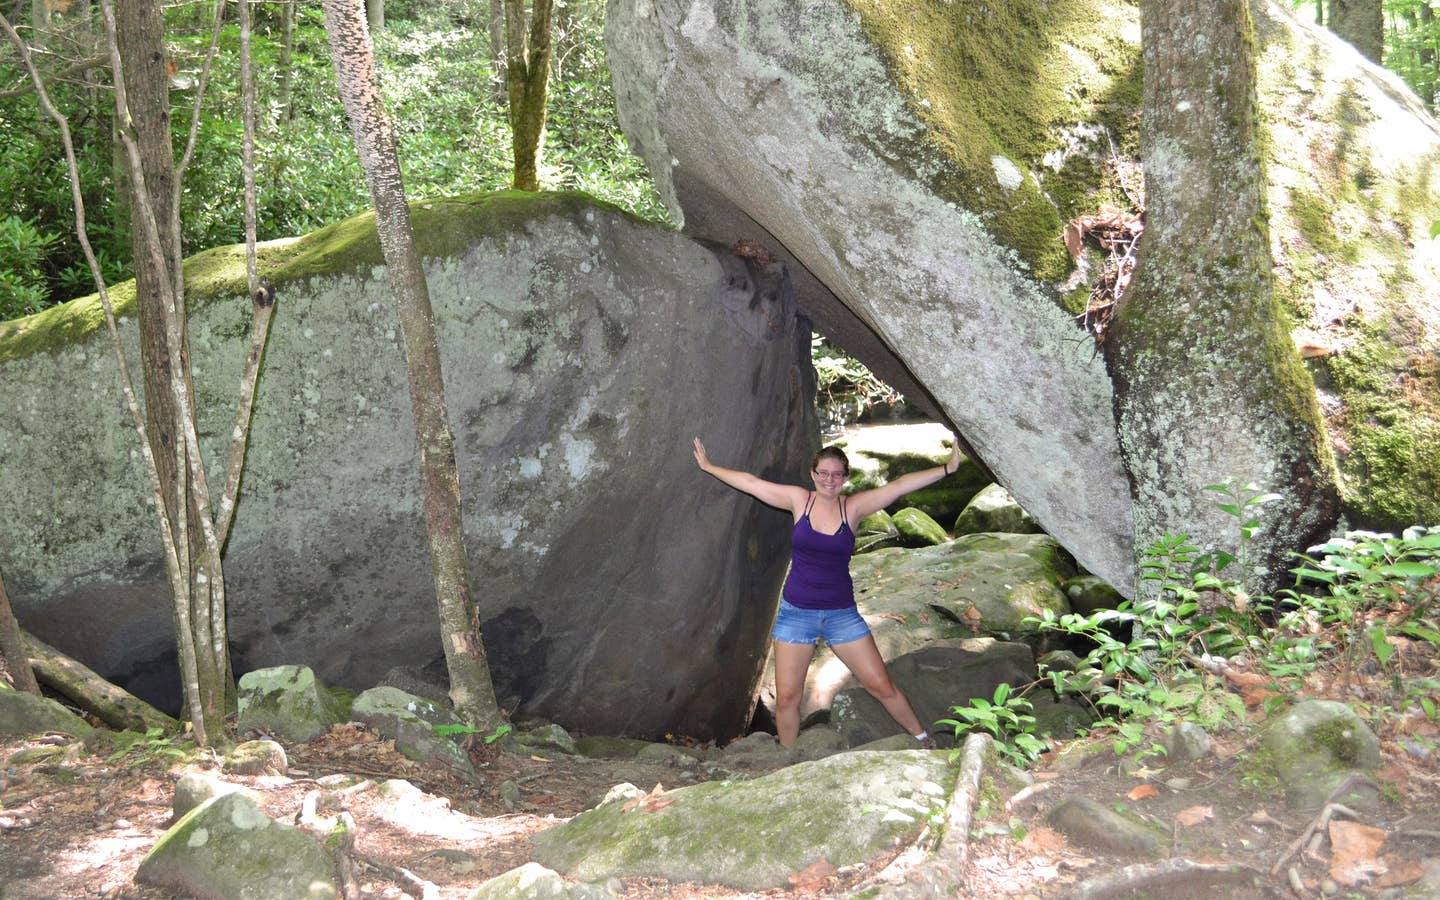 A woman wearing a purple tank top, jean shorts and glasses poses underneath a pair of wedged rocks in Gatlinburg, TN.